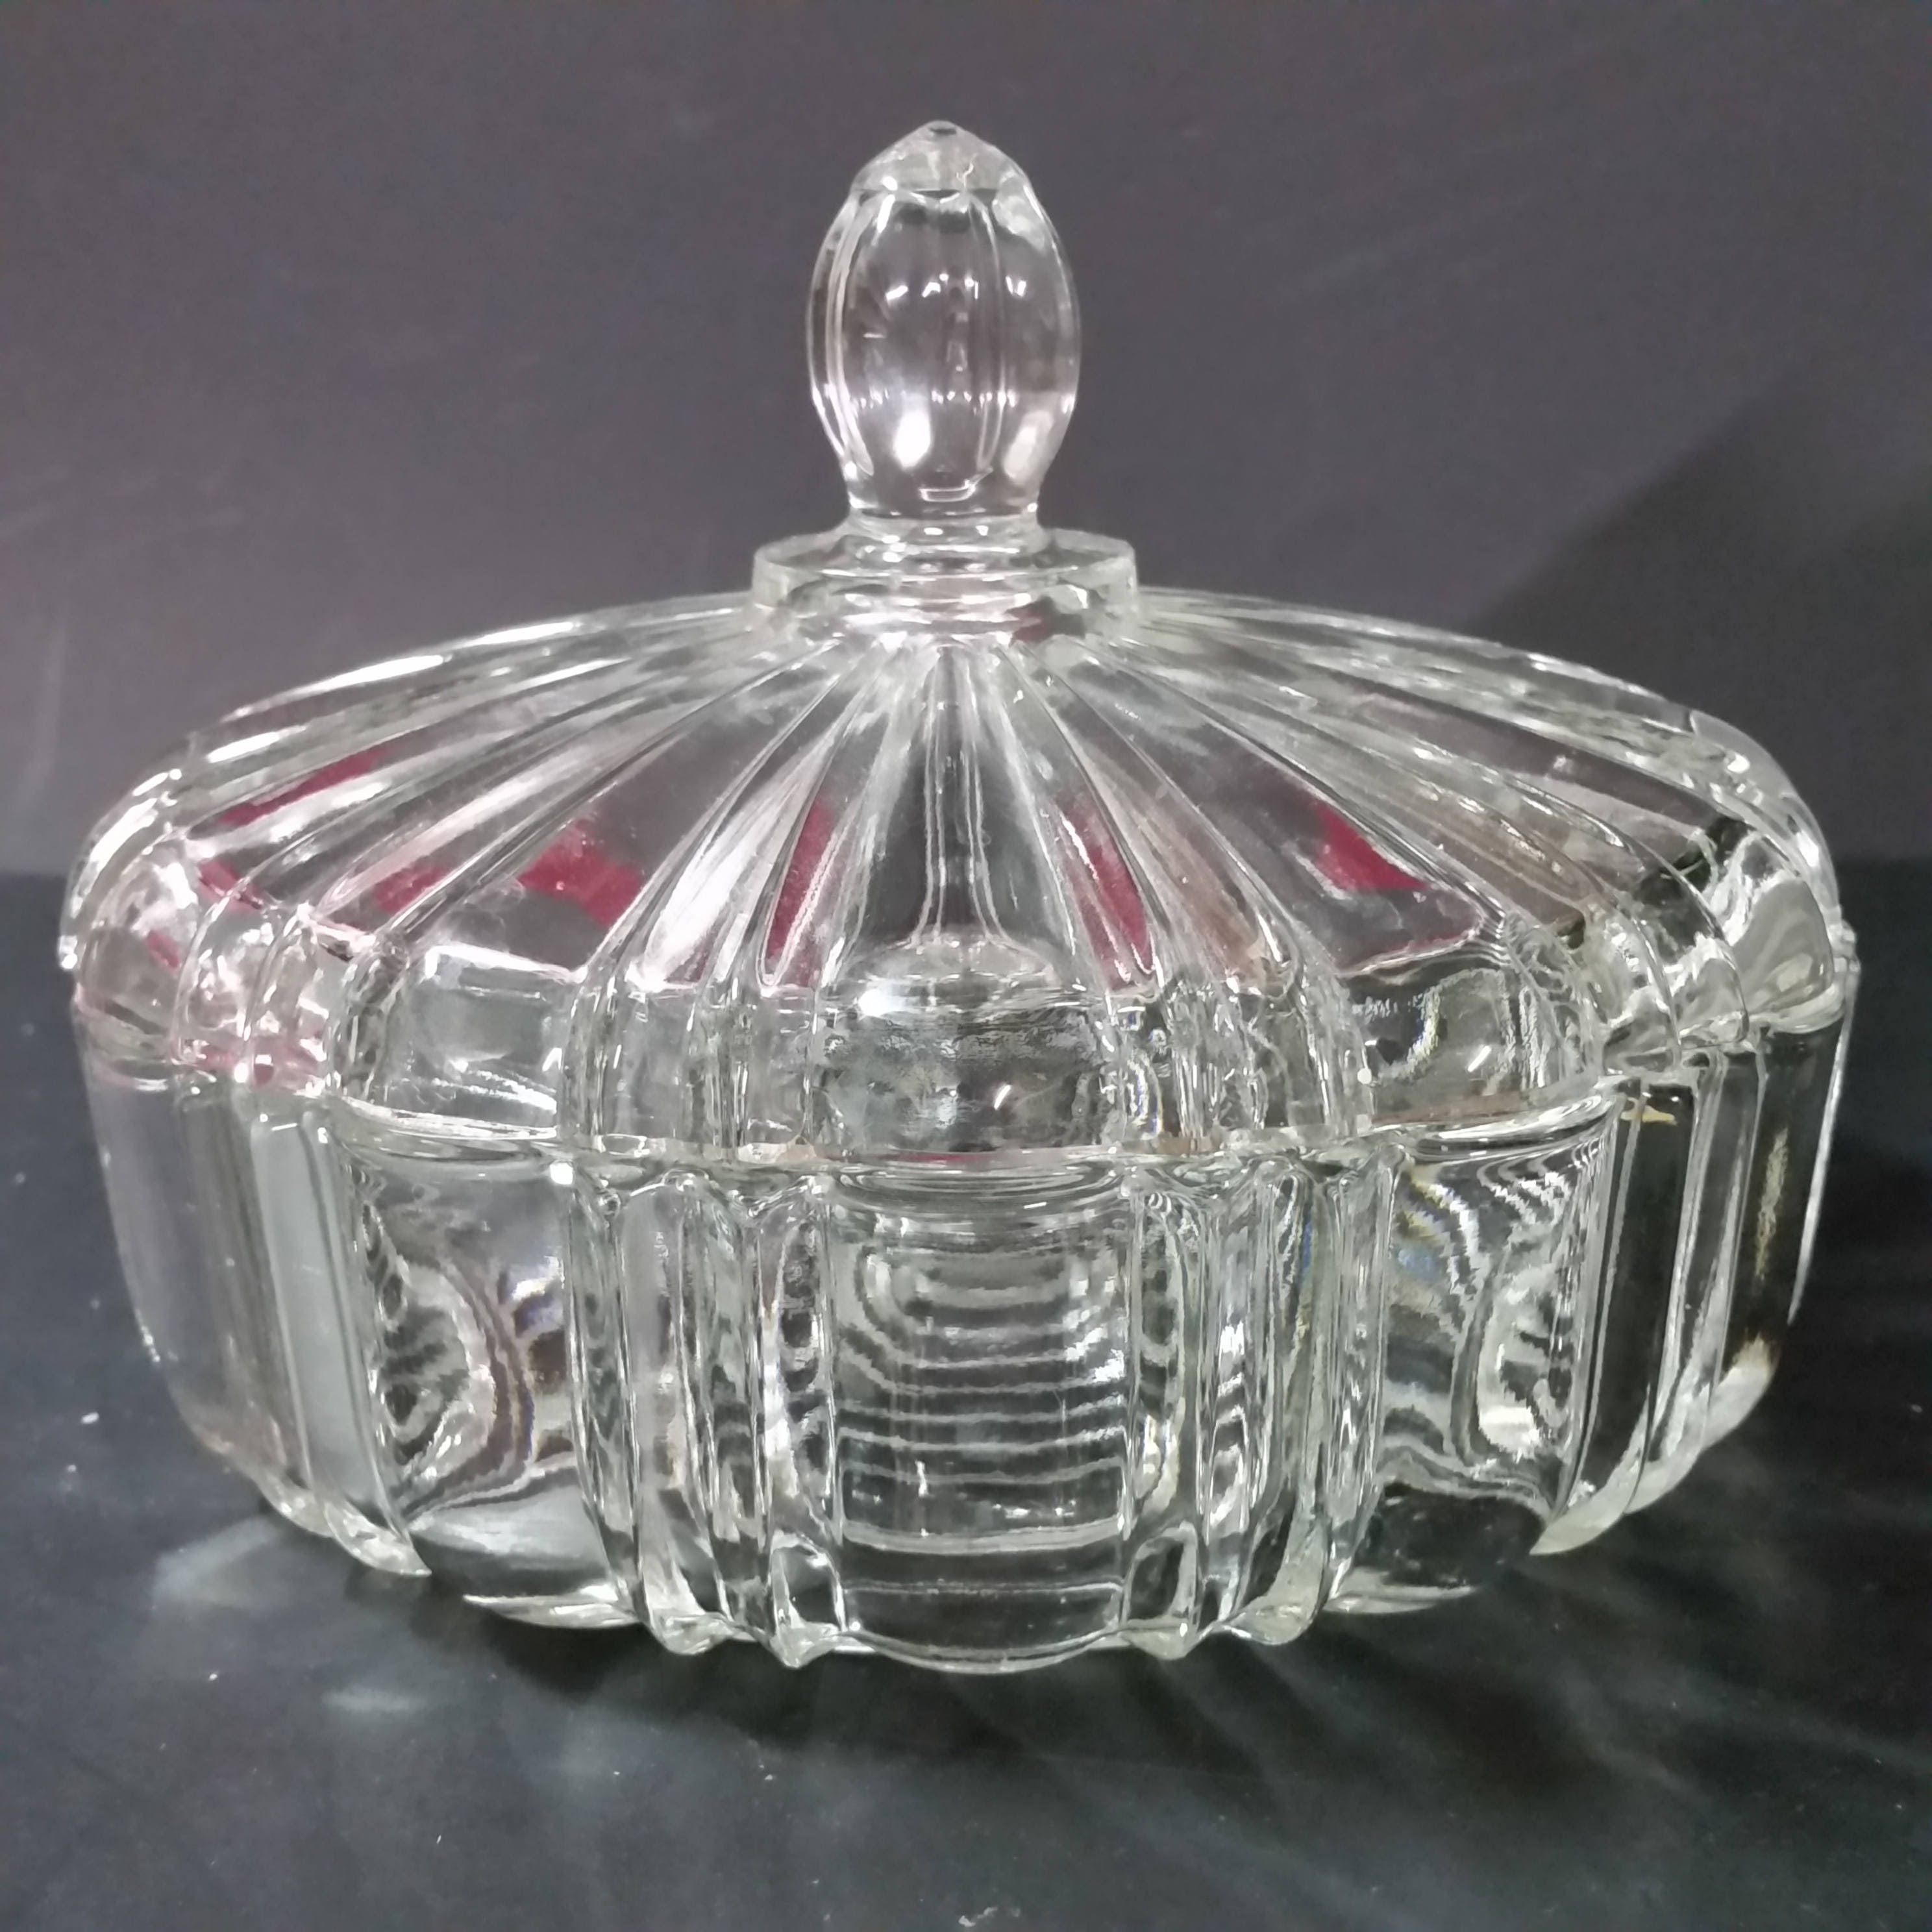 Popvcly Glass Footed Candy Dish with Lid, Clear Covered Candy Bowl